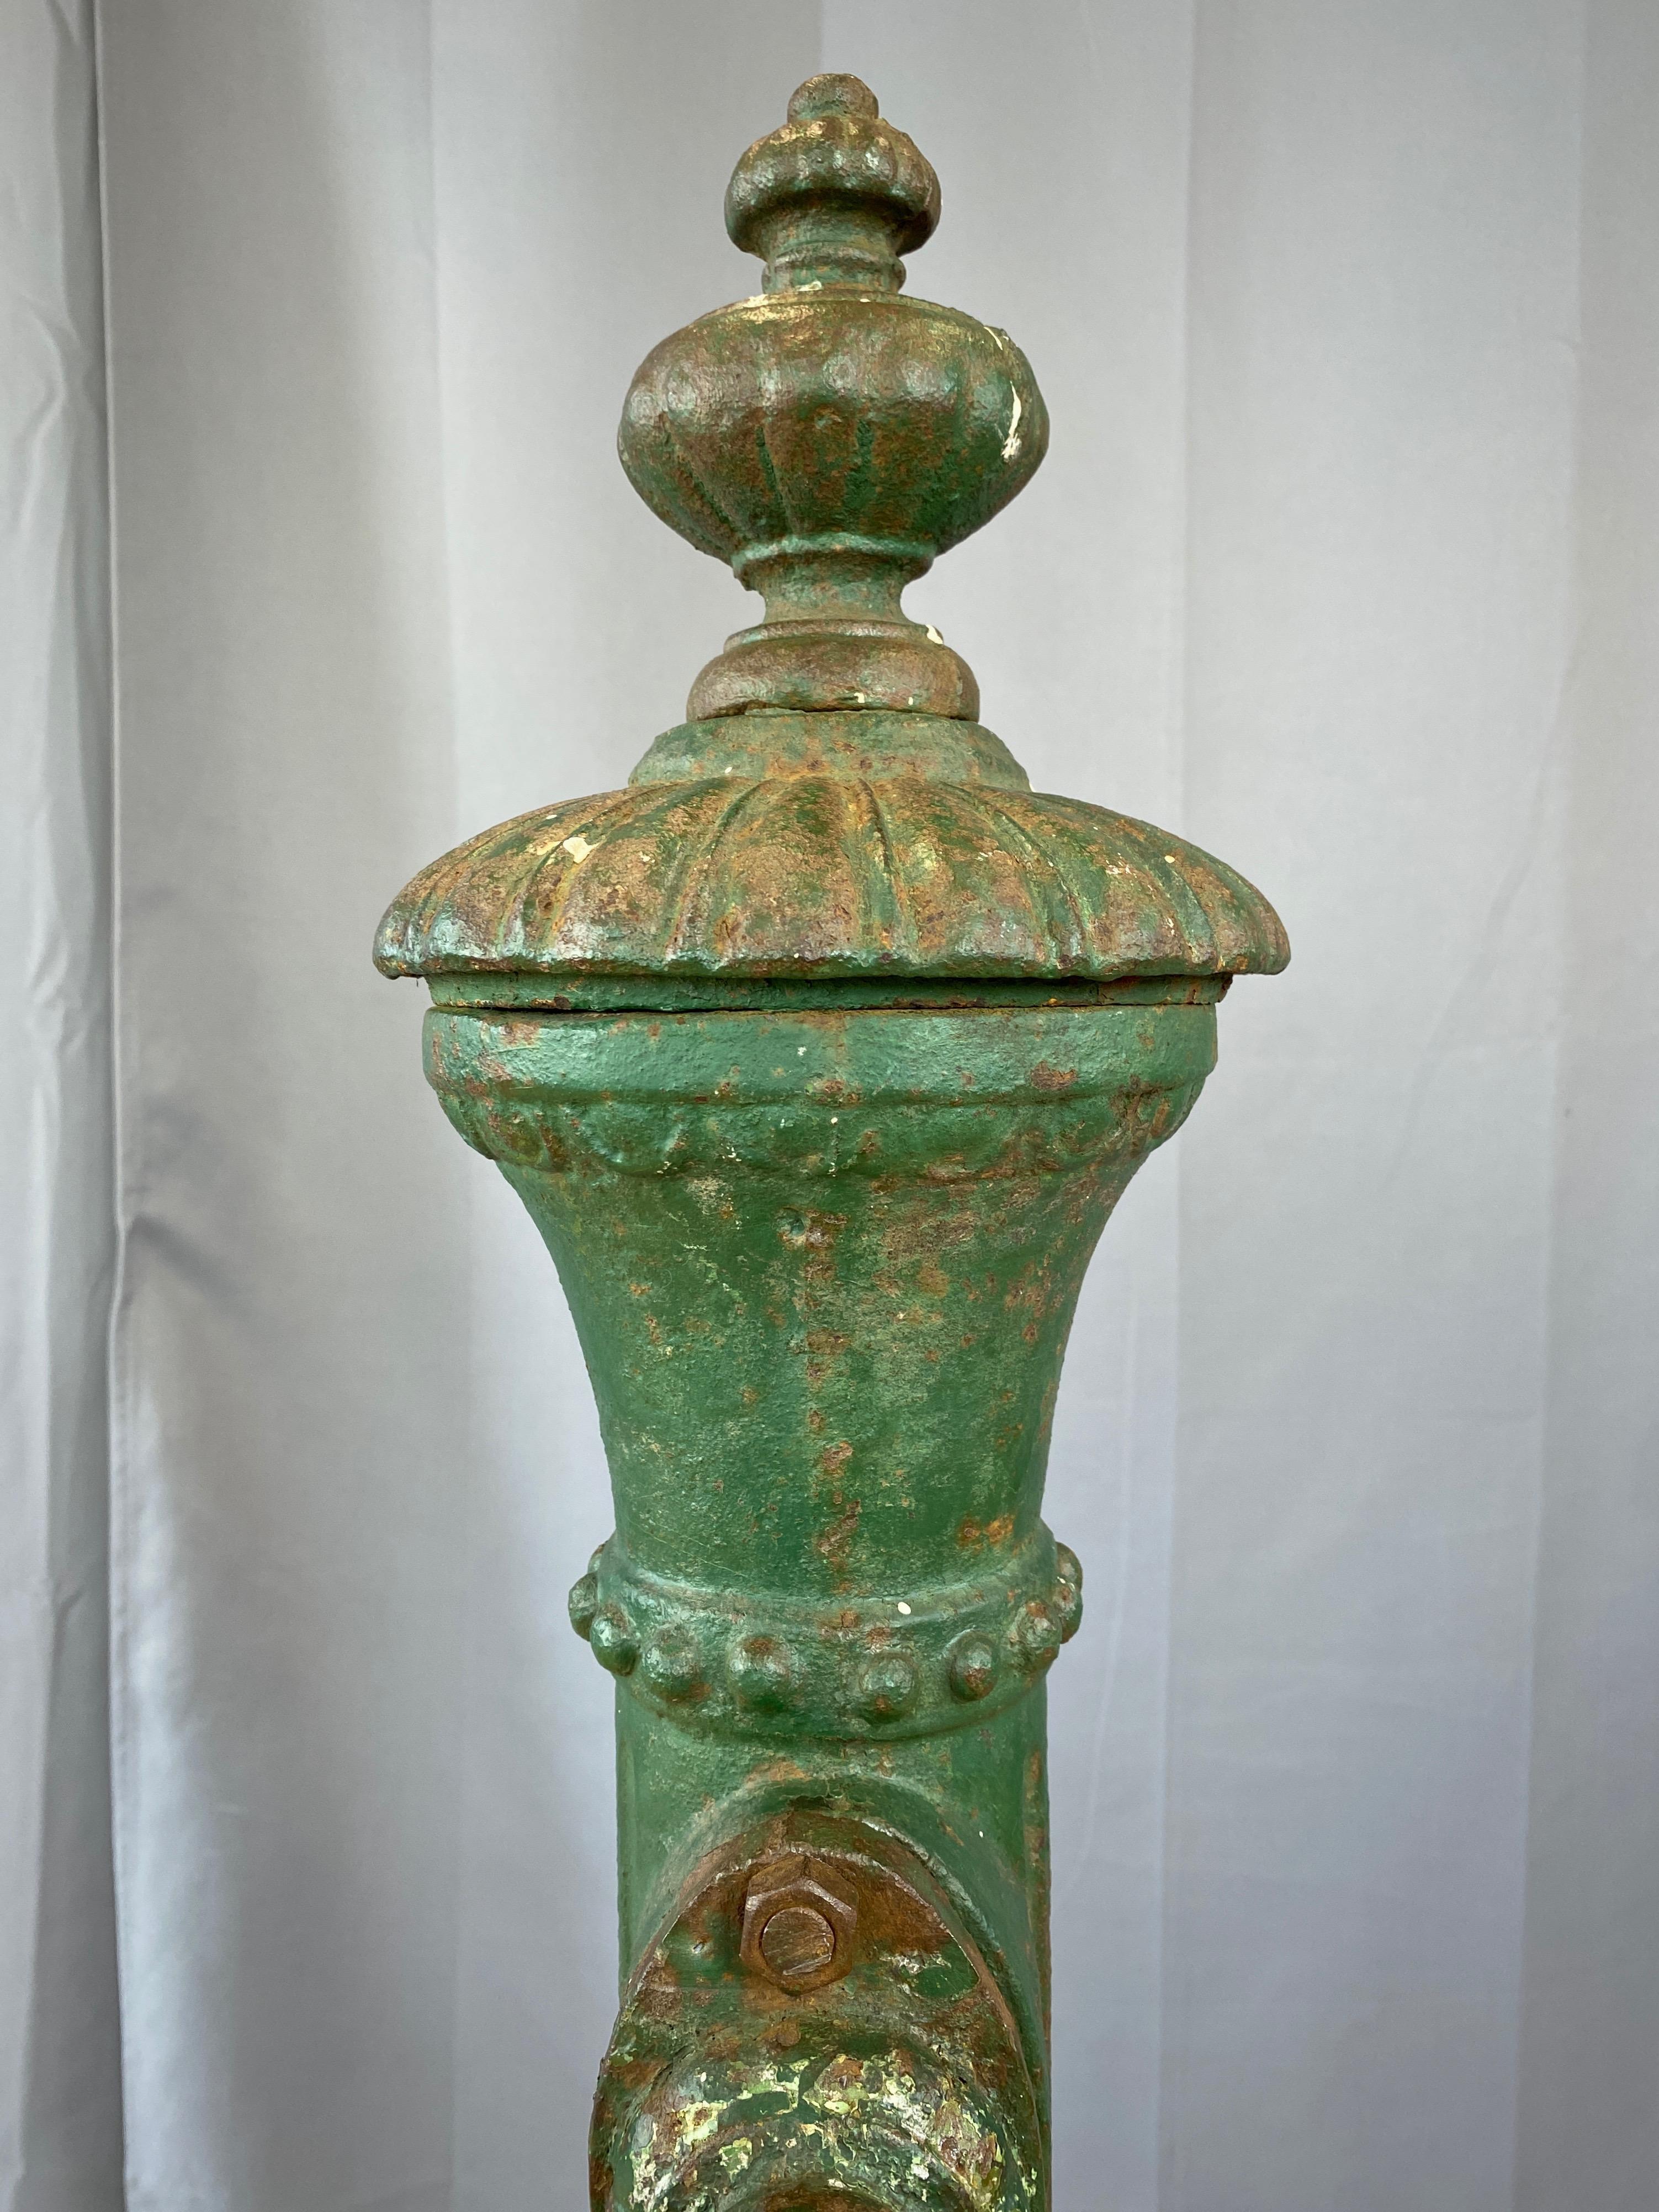 Enamel Antique Tall Green Cast Iron Water Fountain from San Francisco, c. 1860